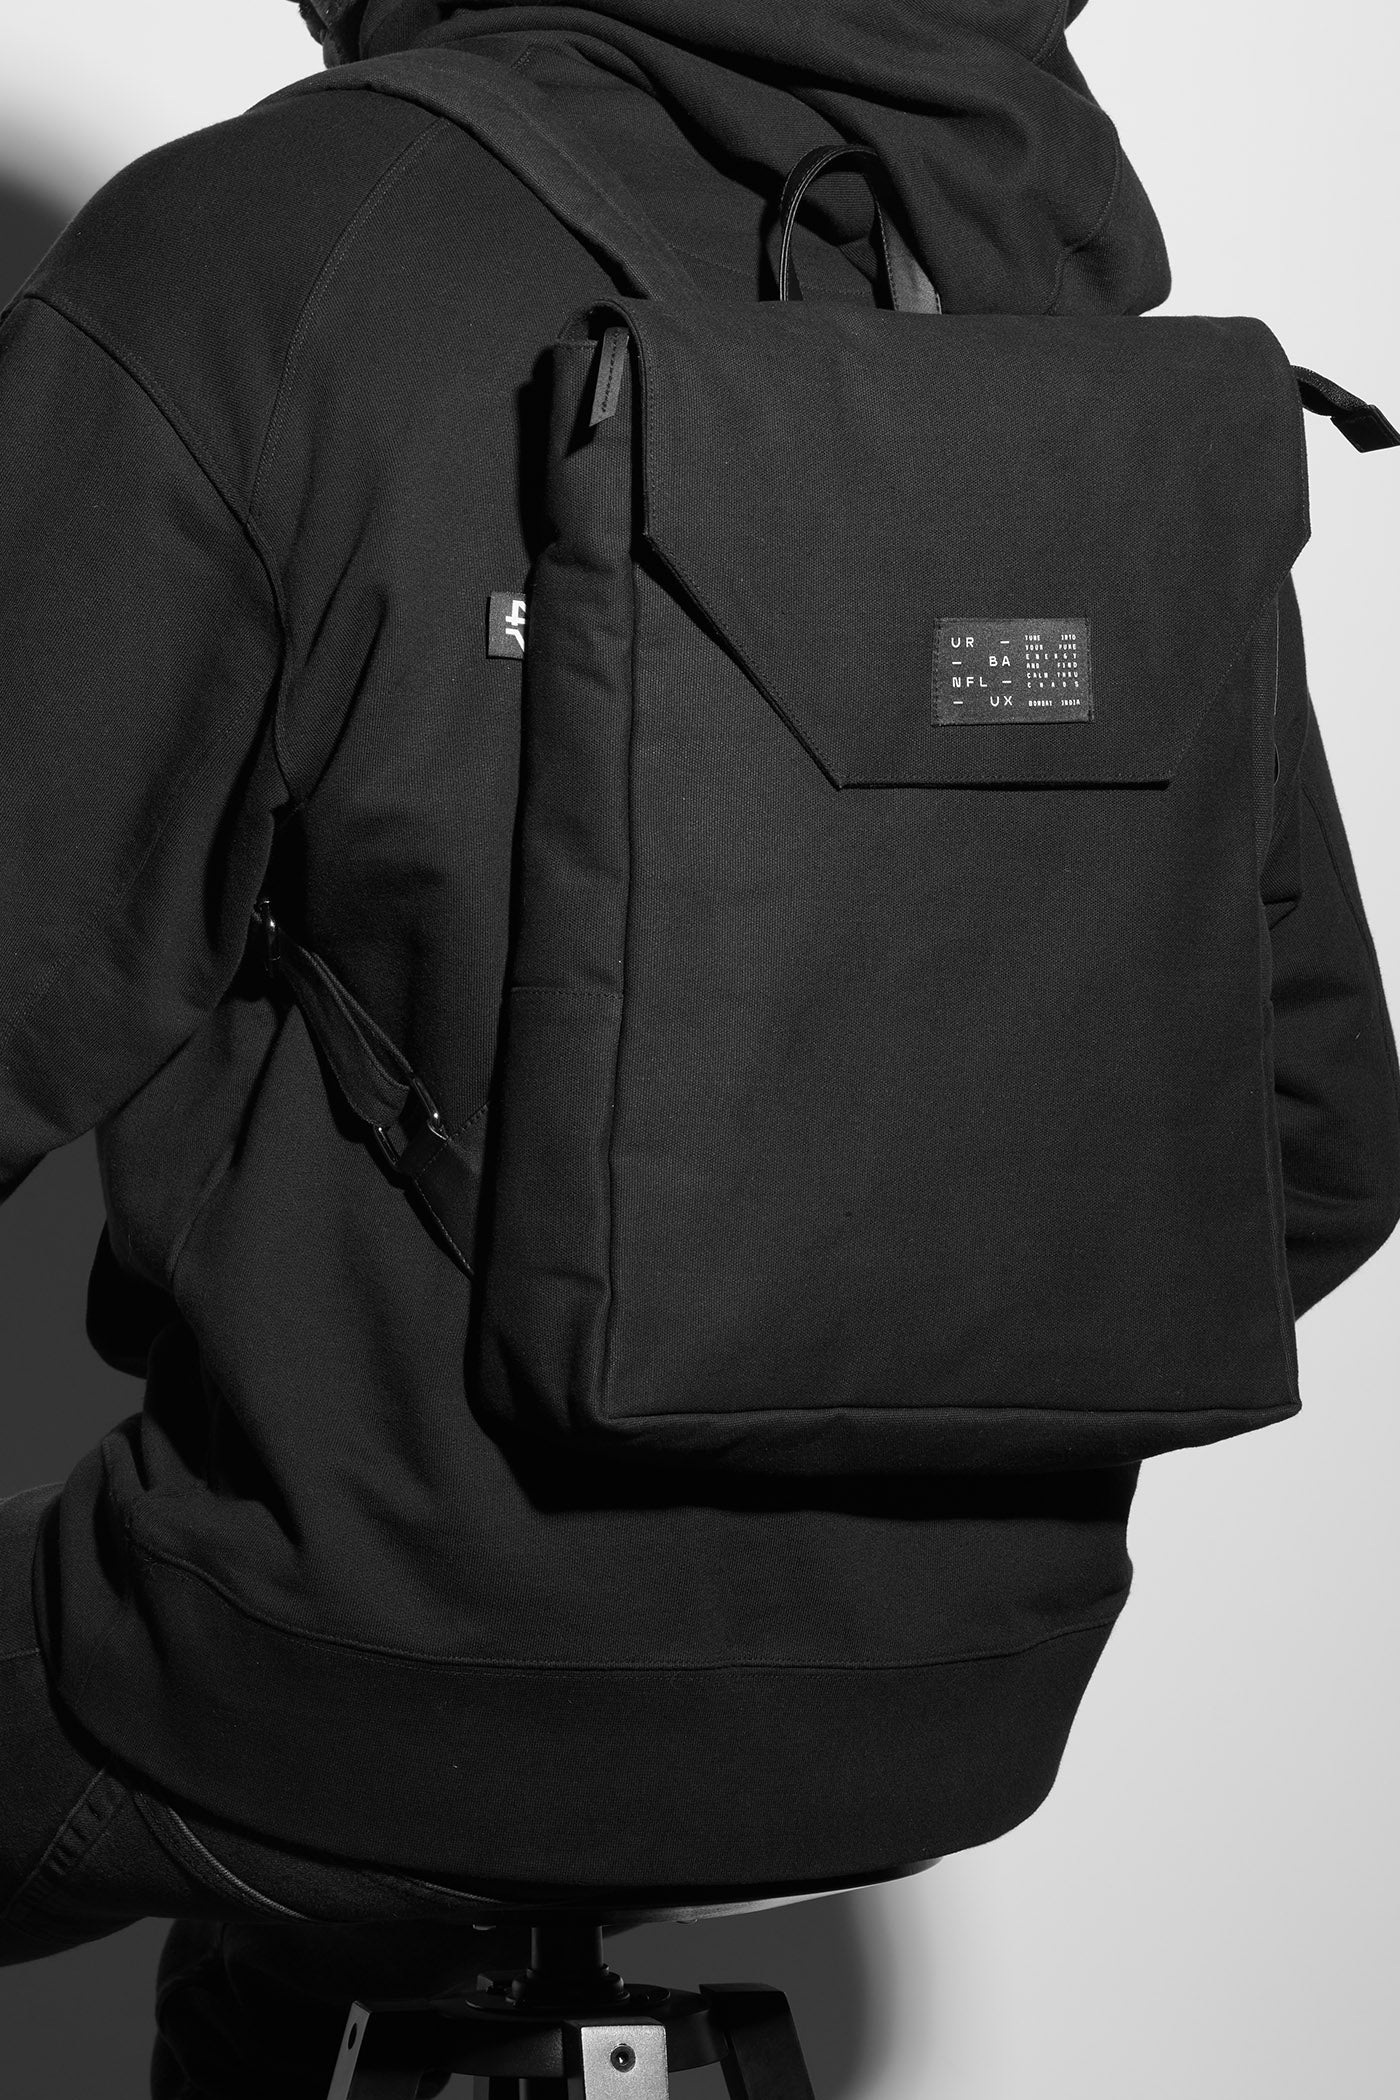 "Business Casual" Backpack